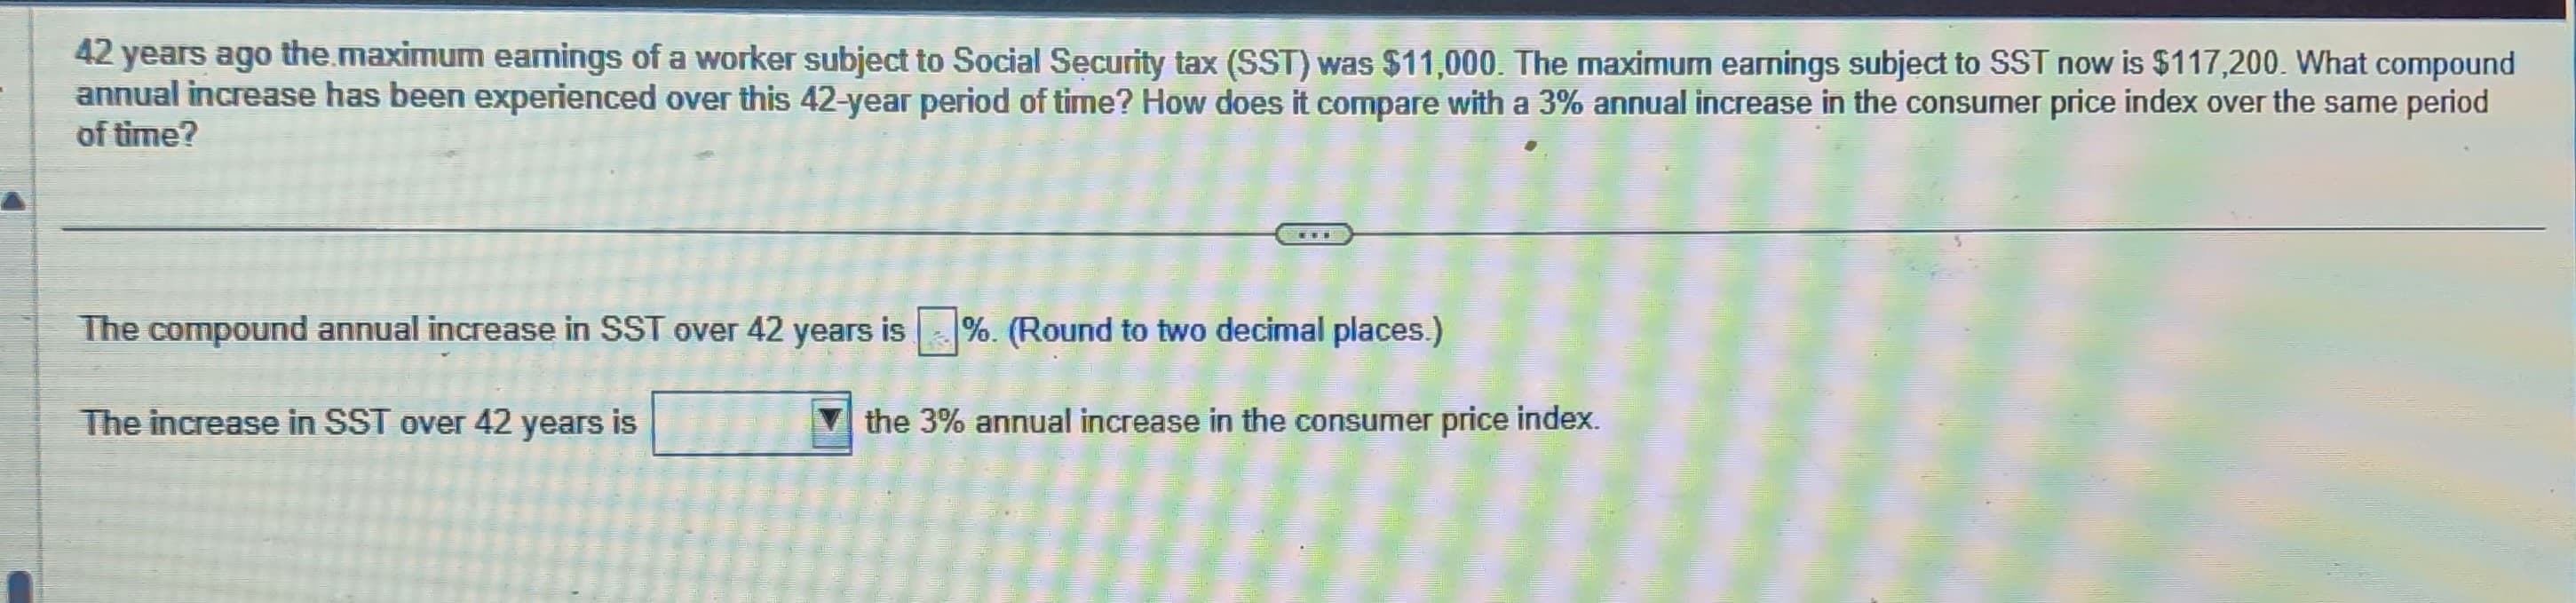 42 years ago the maximum earnings of a worker subject to Social Security tax (SST) was $11,000. The maximum earnings subject to SST now is $117,200. What compound
annual increase has been experienced over this 42-year period of time? How does it compare with a 3% annual increase in the consumer price index over the same period
of time?
The compound annual increase in SST over 42 years is %. (Round to two decimal places.)
The increase in SST over 42 years is
the 3% annual increase in the consumer price index.